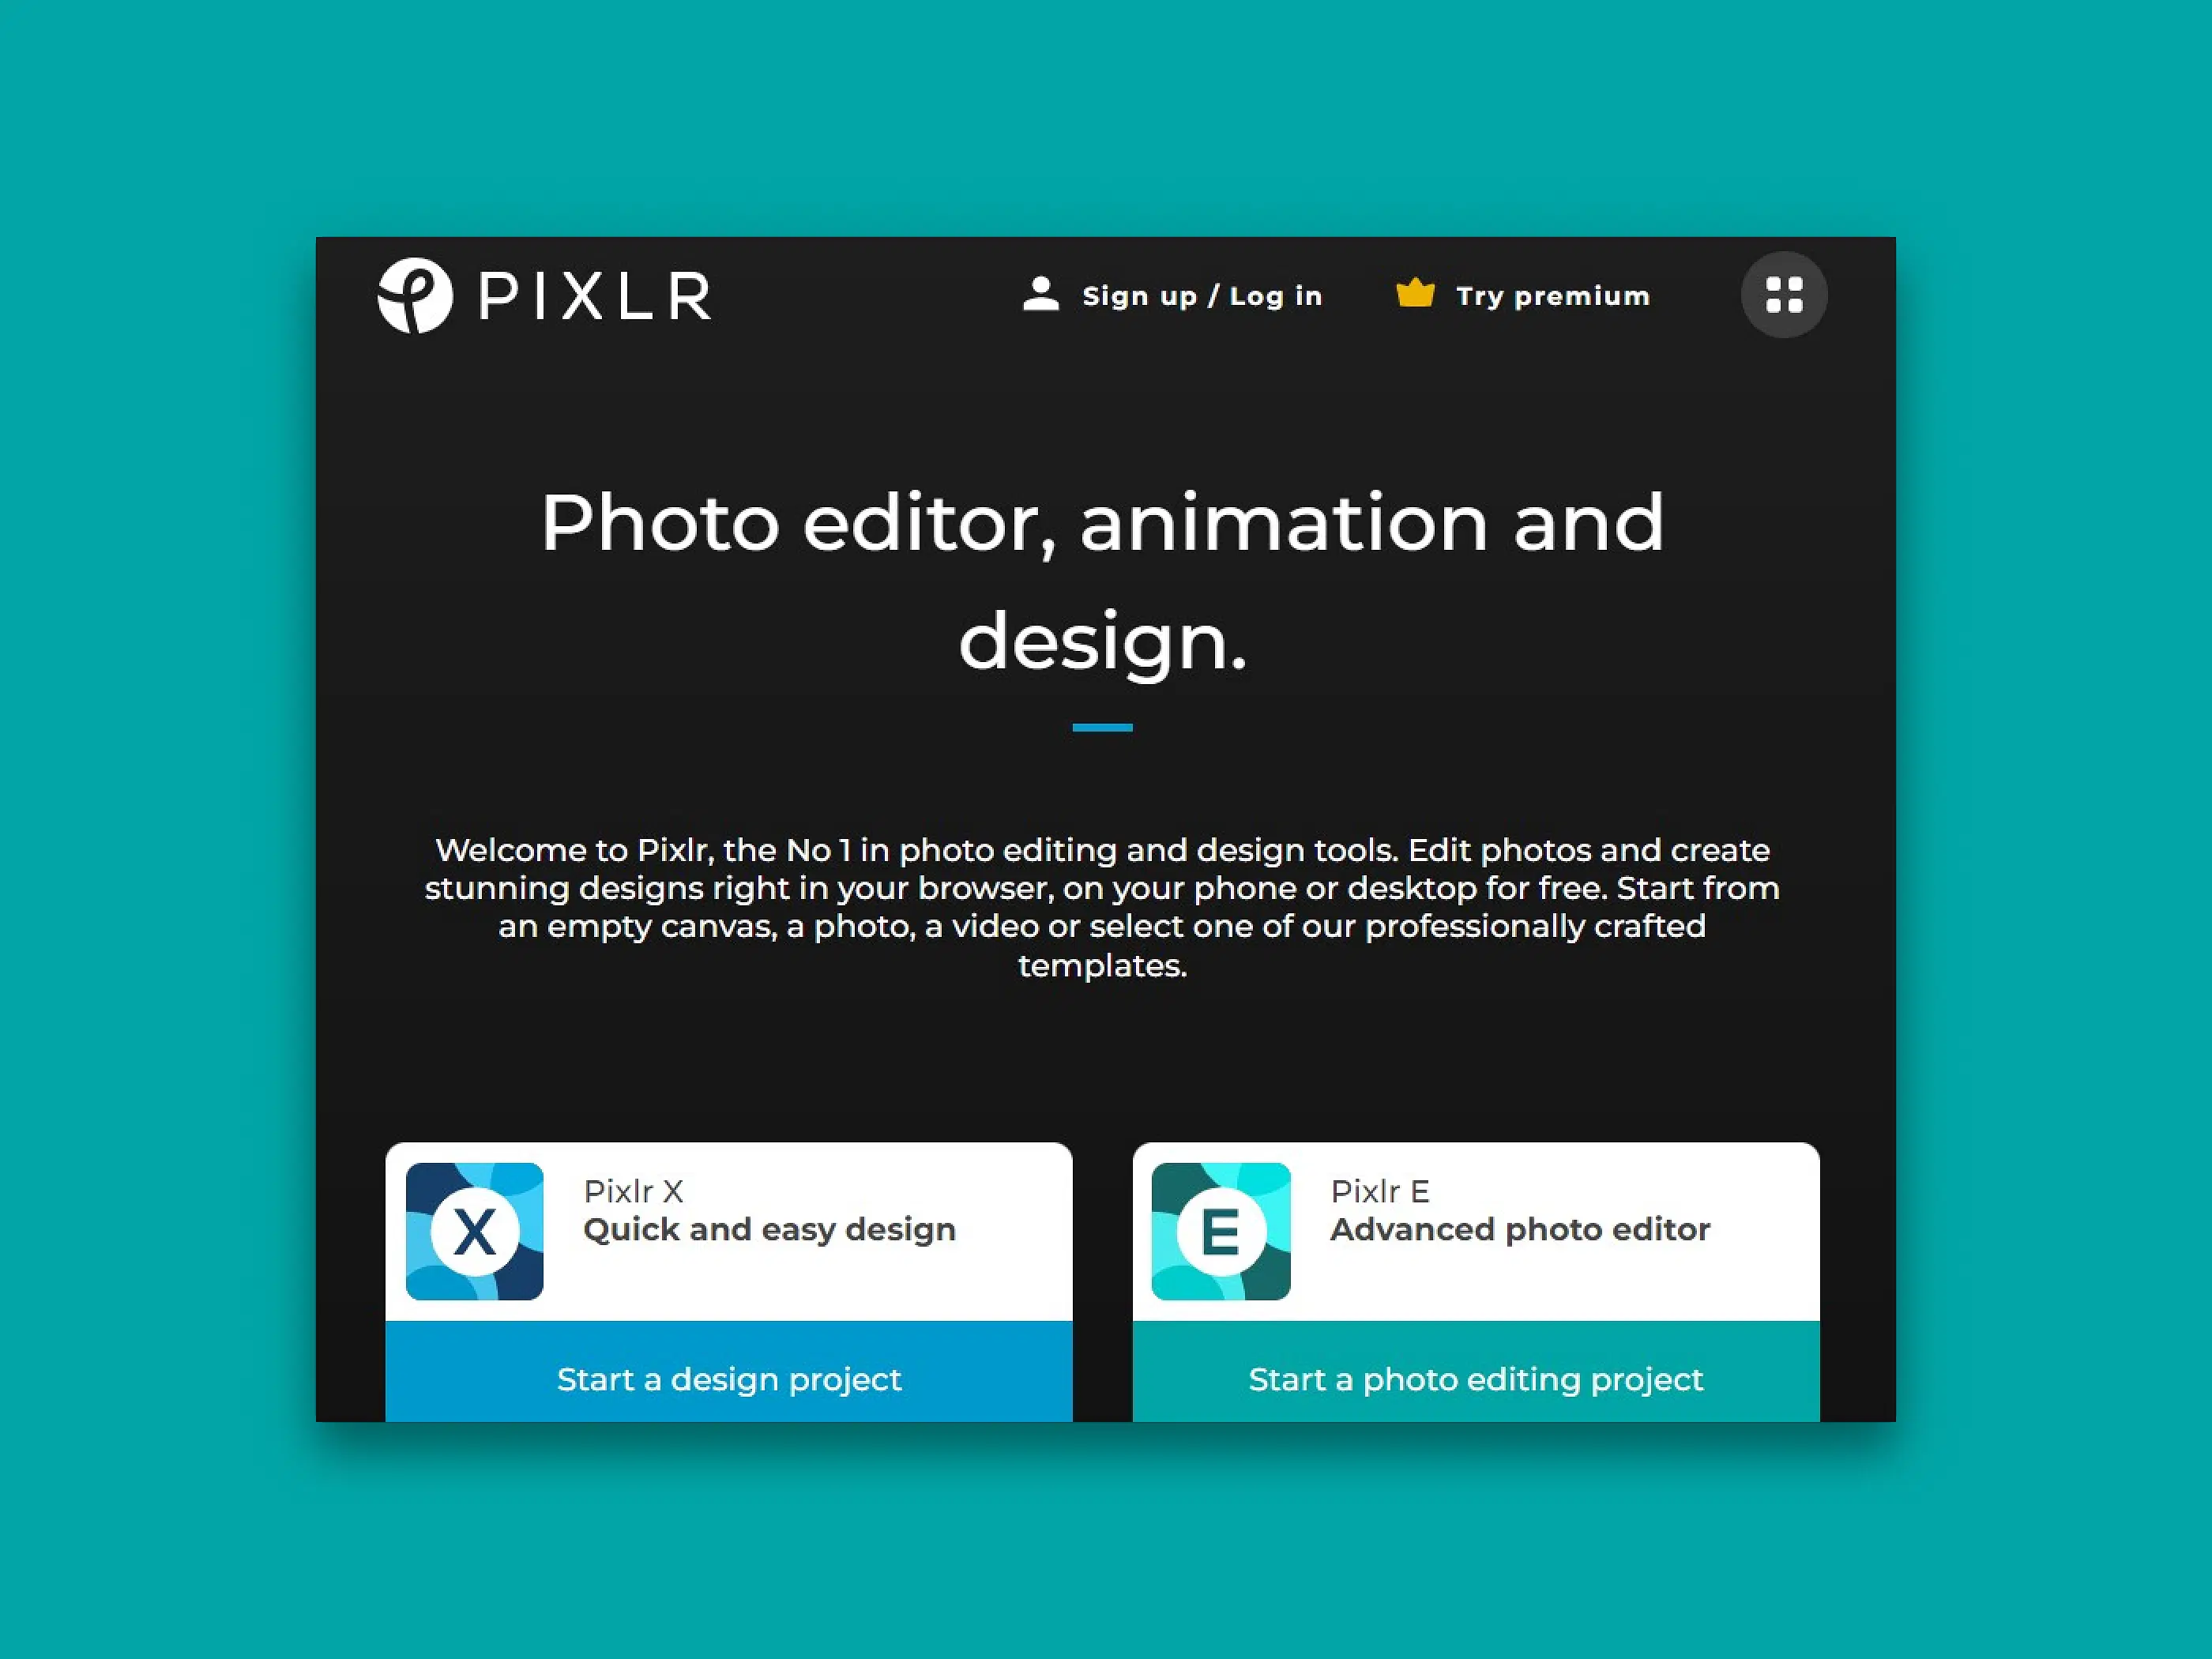 Here's How to Use Pixlr E to Edit Photos Free